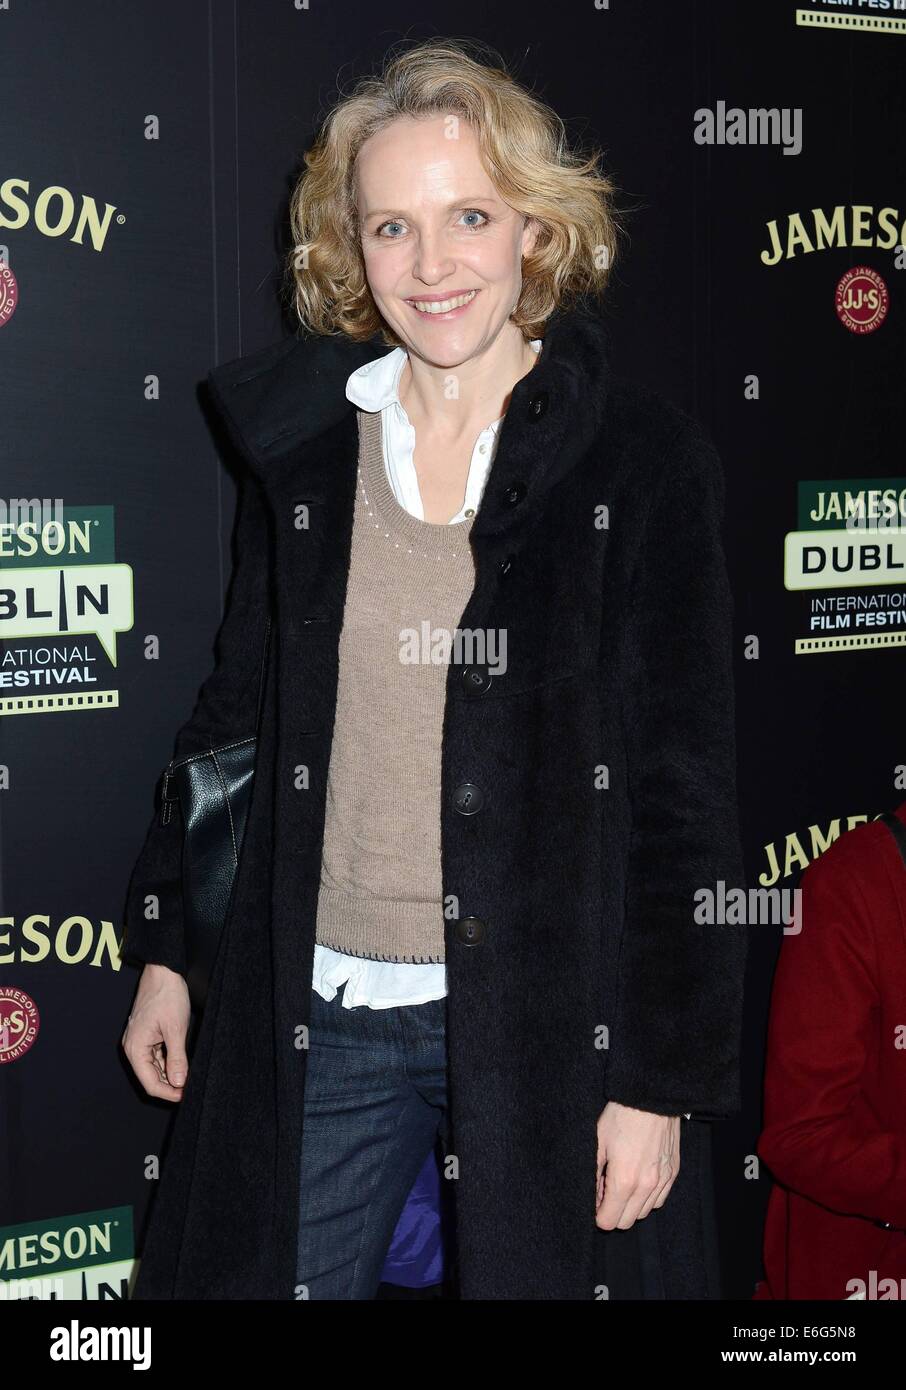 German actress Juliane Kohler attends the screening of 'Two Lives' as part of The Jameson Dublin International Film Festival at the Lighthouse Cinema...  Featuring: Juliane Kohler Where: Dublin, Ireland When: 16 Feb 2014 Stock Photo